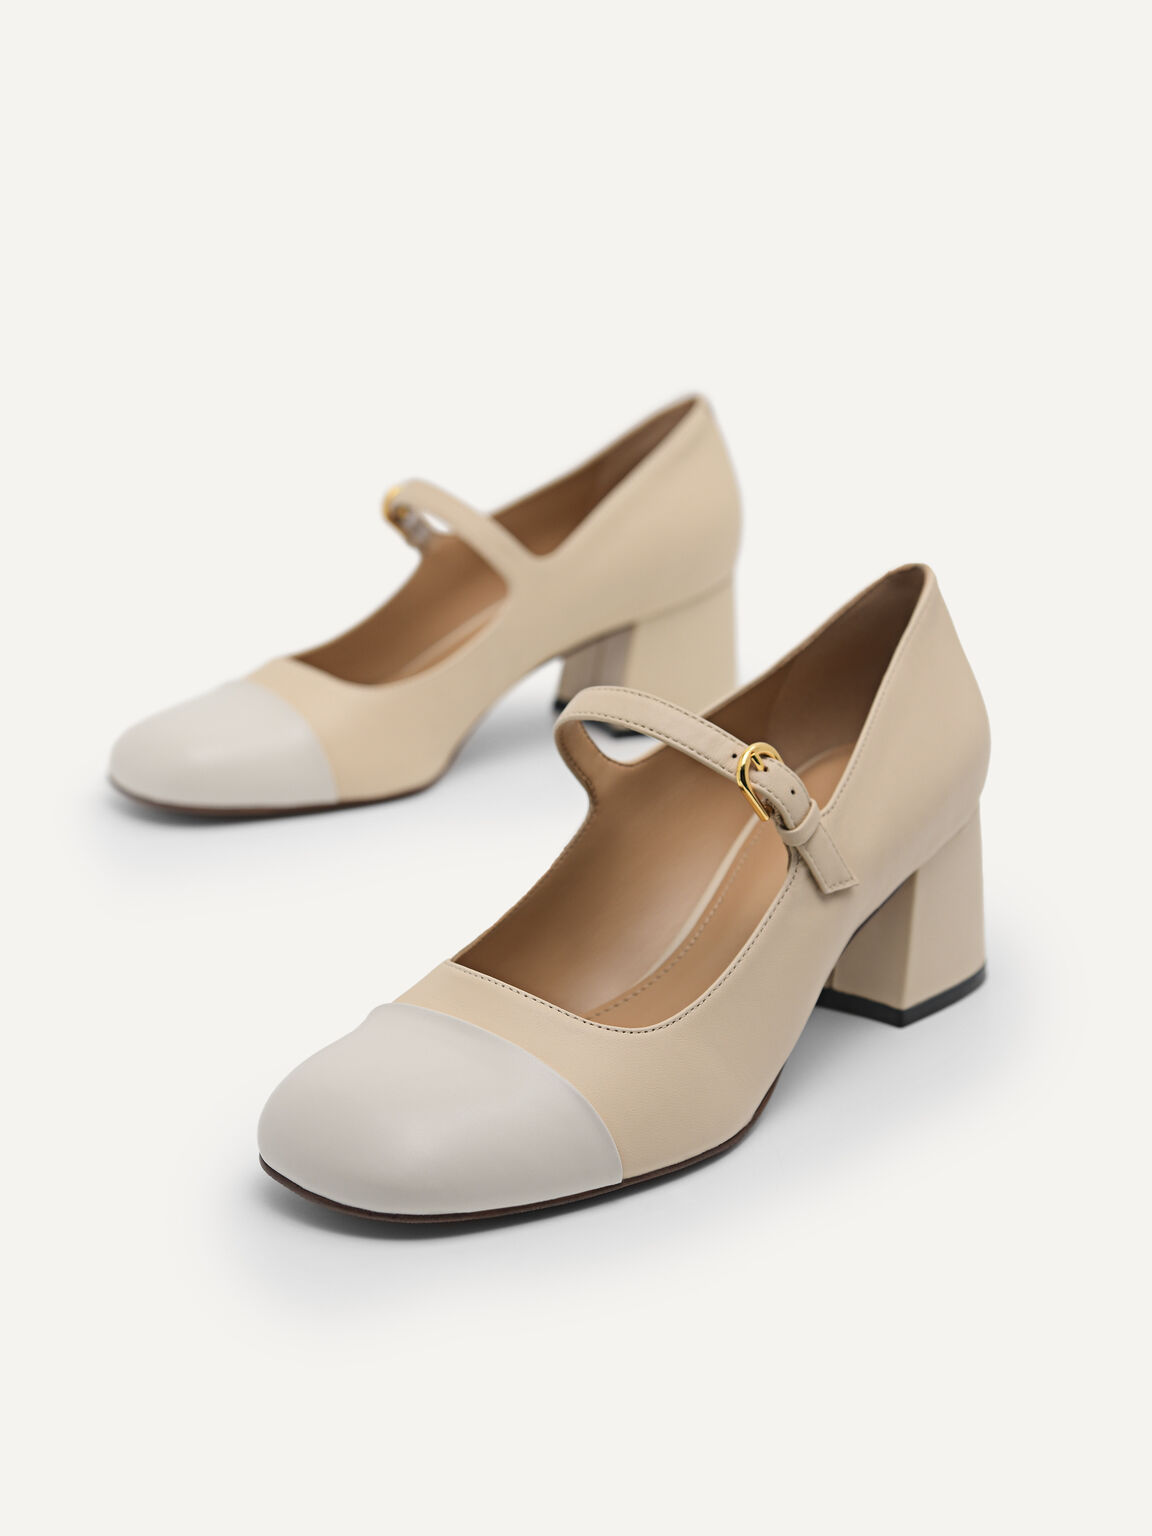 Leather Cap Toe Mary Jane Pumps, Sand, hi-res